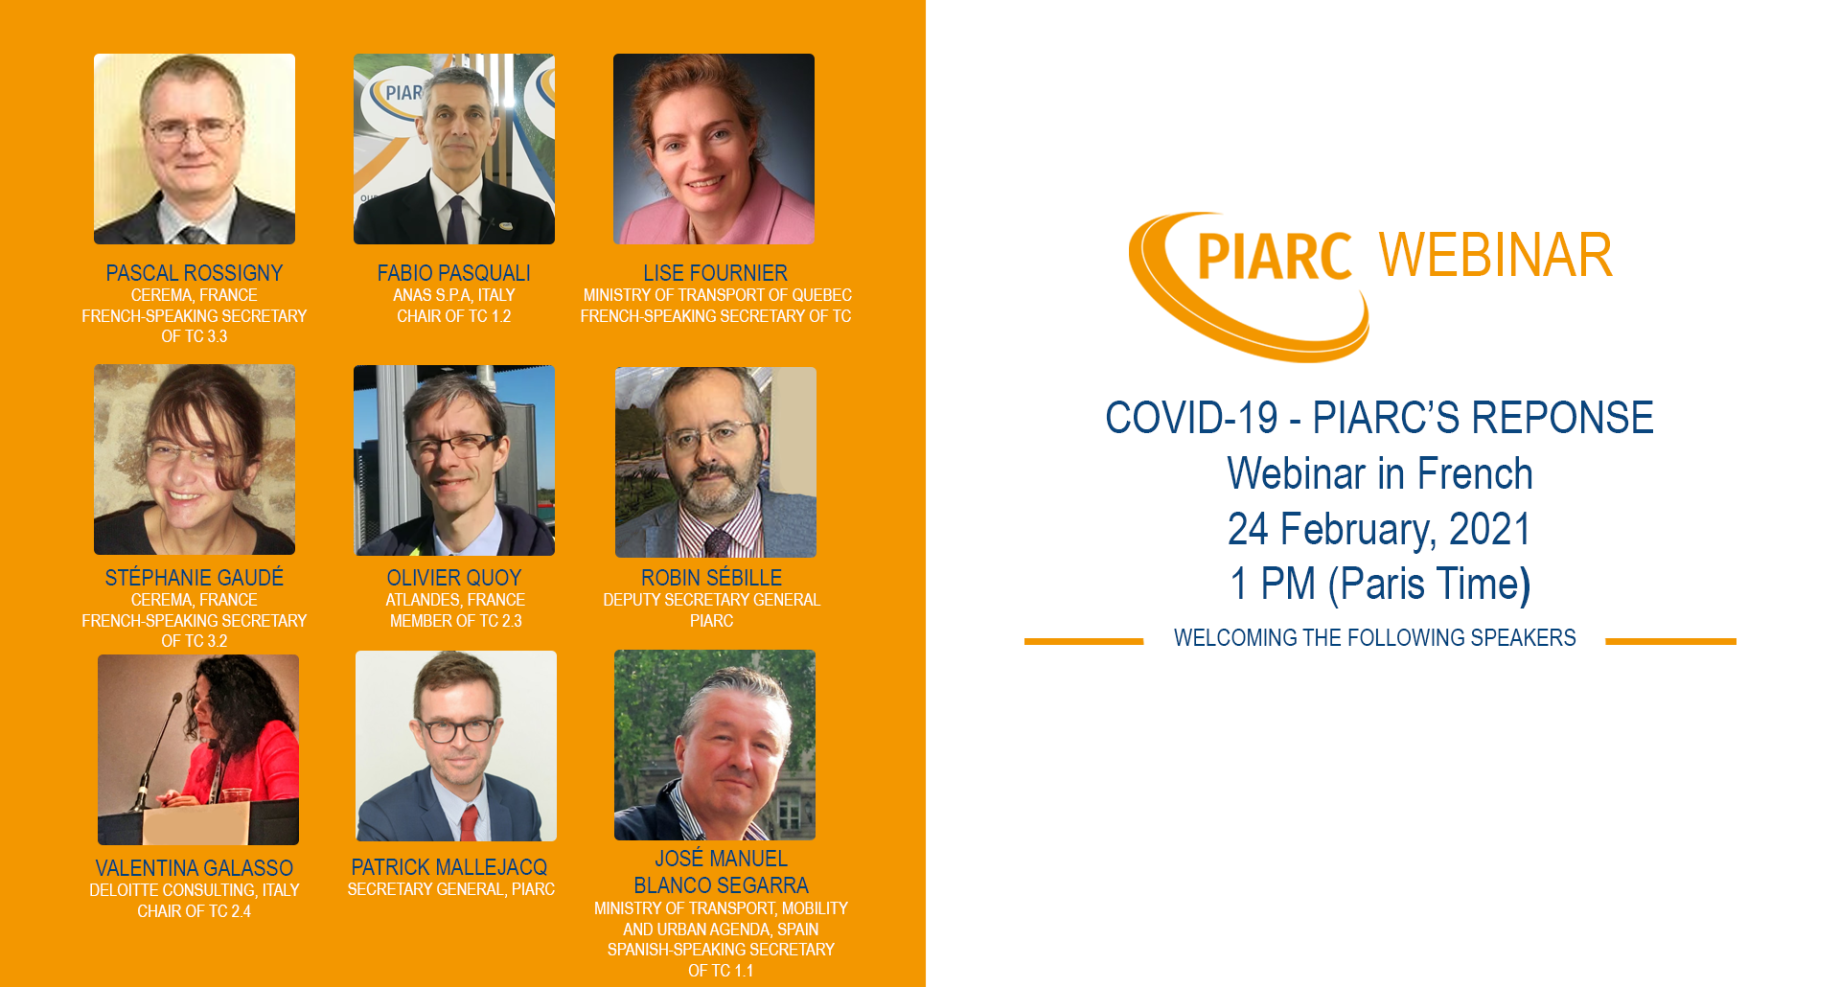 Learn more about the COVID-19 report in PIARC's next webinar!